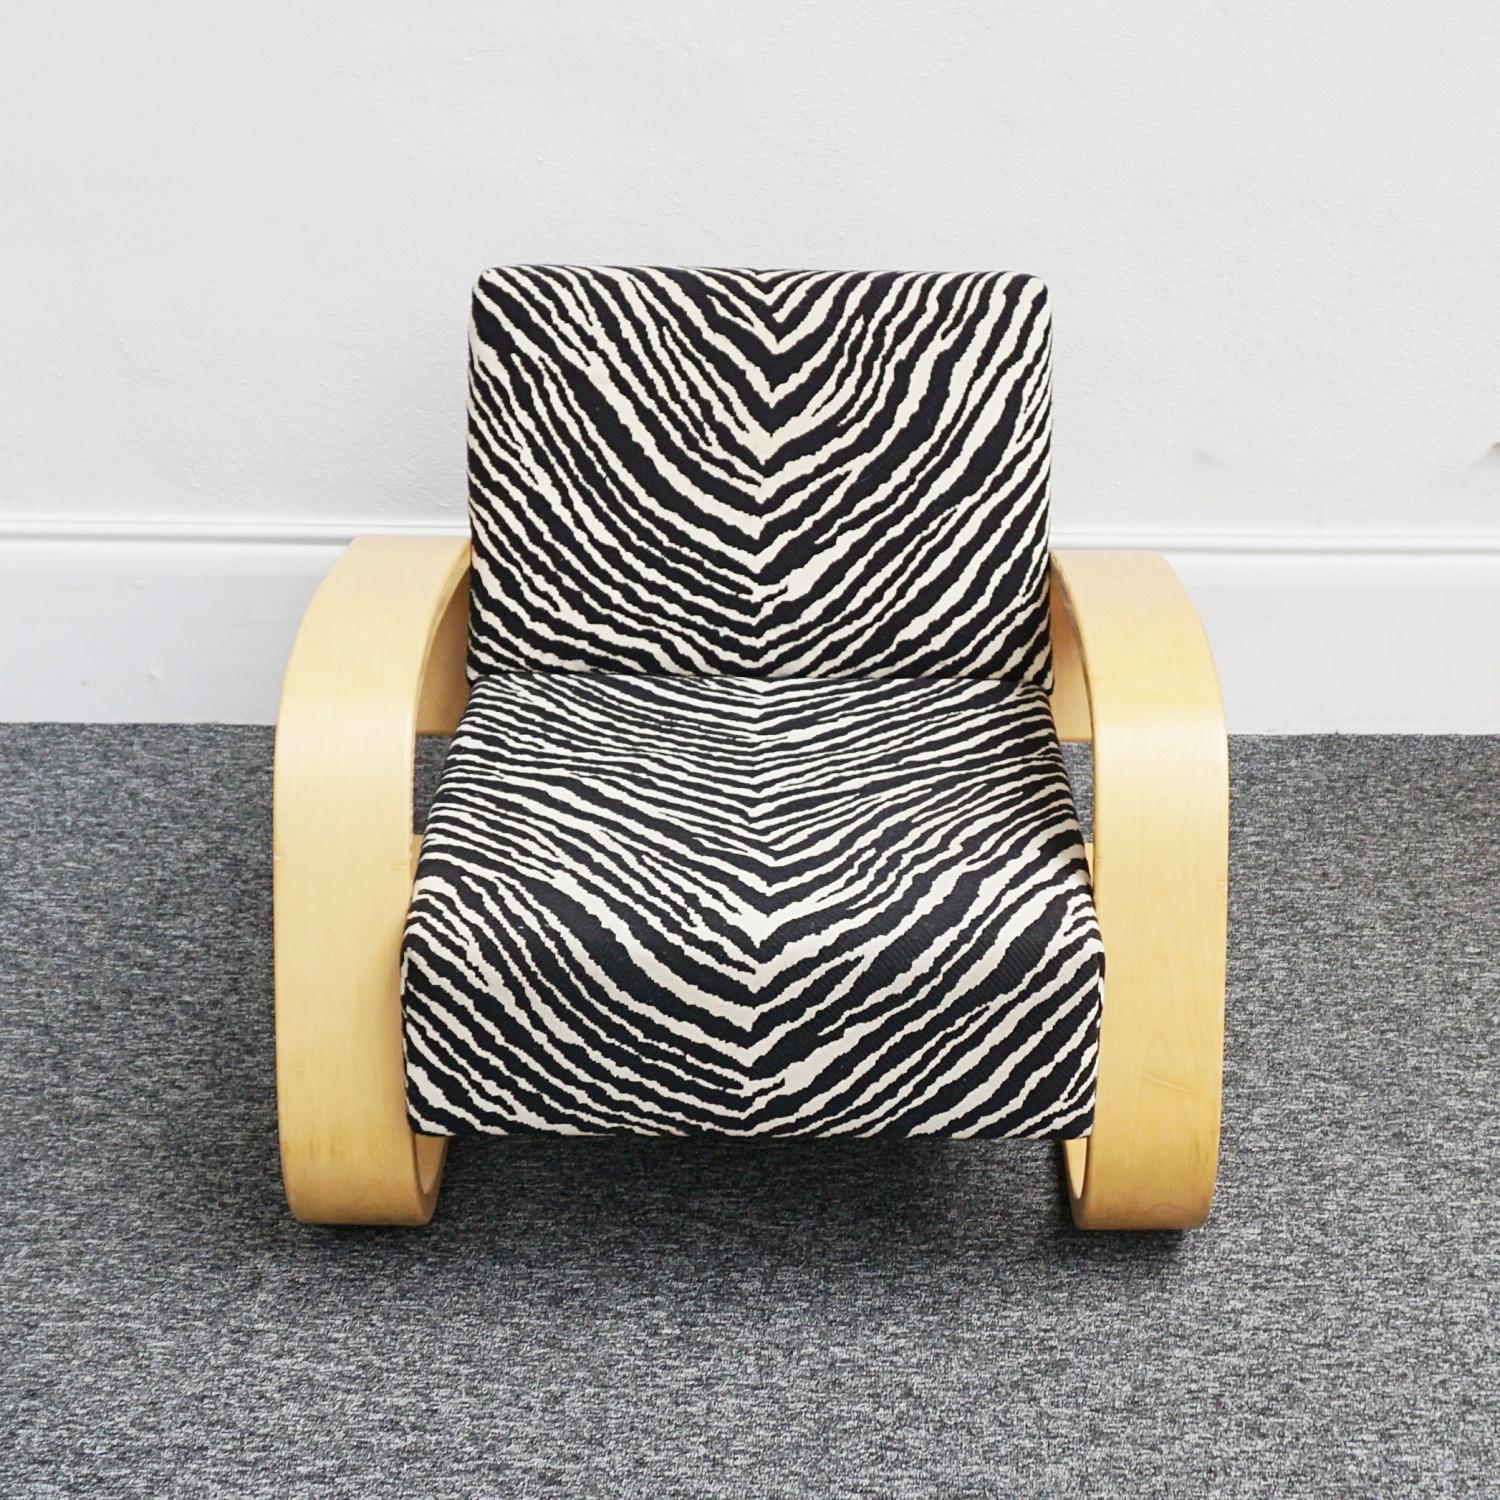 A mid-century tank chair Model 400 designed by Alvar Aalto and produced by Artek. Curved frame with original Zebra' upholstery. 

Dimensions: H 66cm, W 76.5cm, D 81cm.

Alvar Aalto was born in Finland in 1898. One of the founders of the